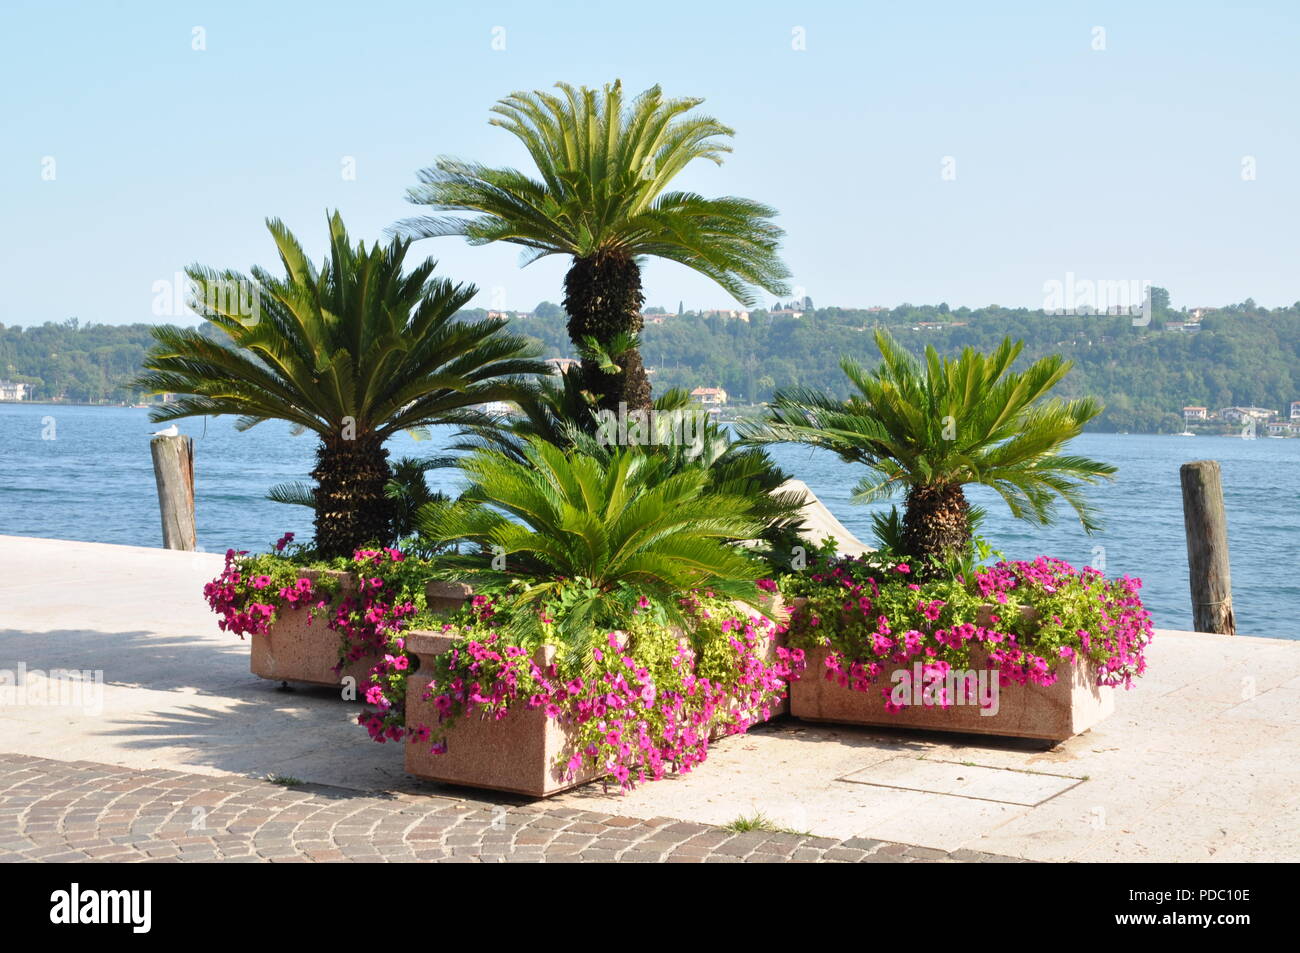 Tree palms and flowers at the lake Garda in Solo, Italy Stock Photo